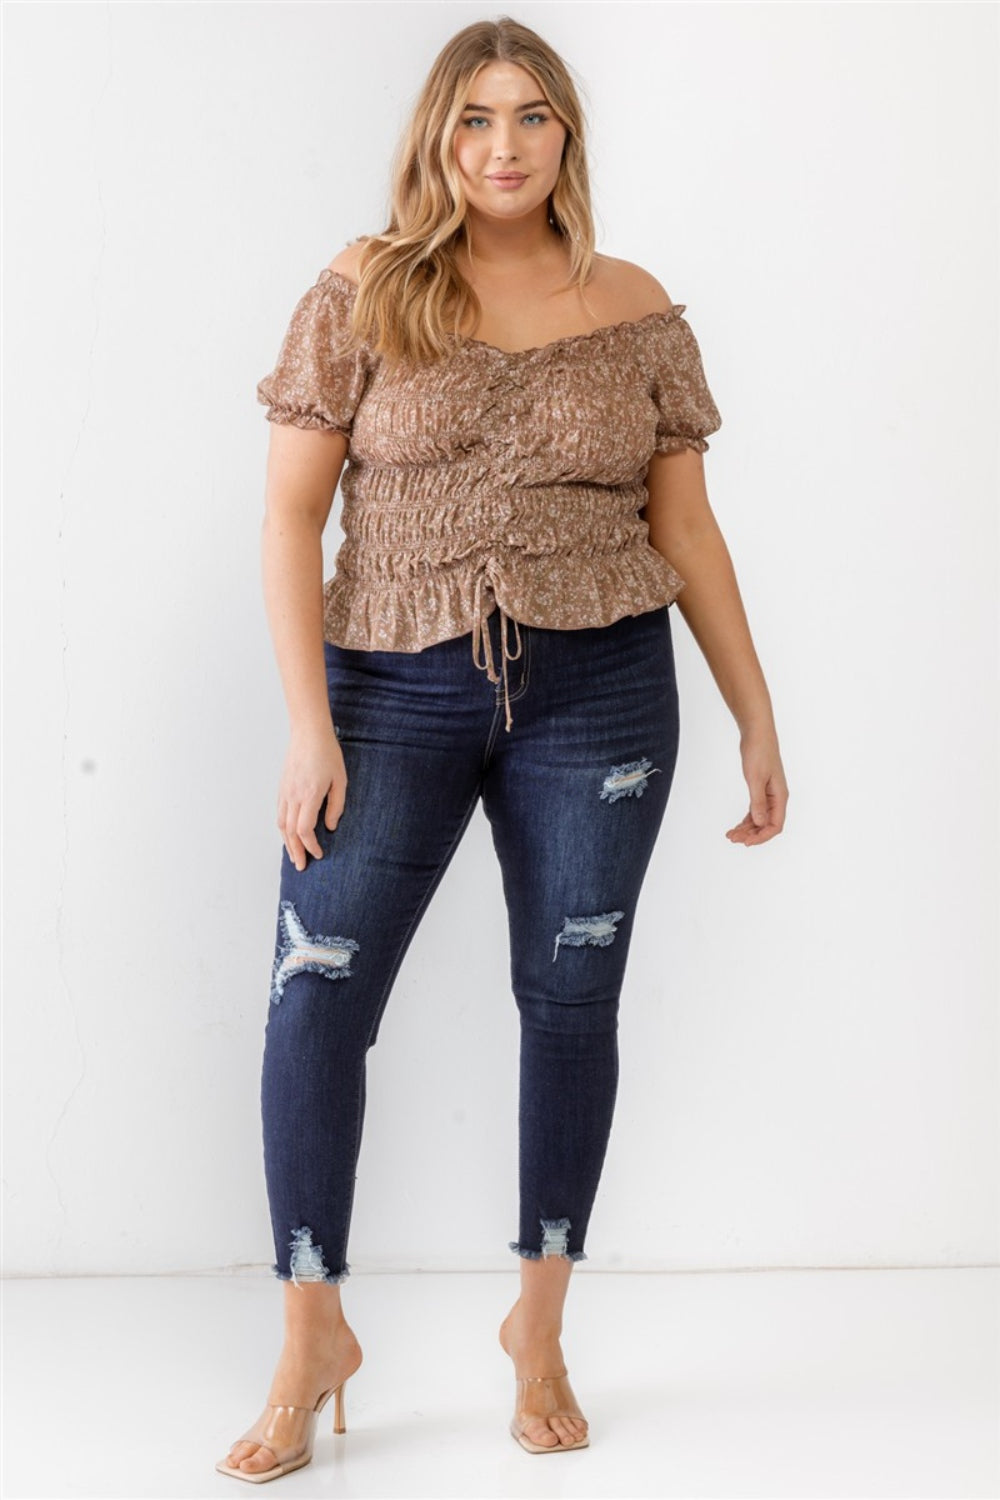 Zenobia Plus Size Frill Ruched Off-Shoulder Short Sleeve Blouse - Thandynie